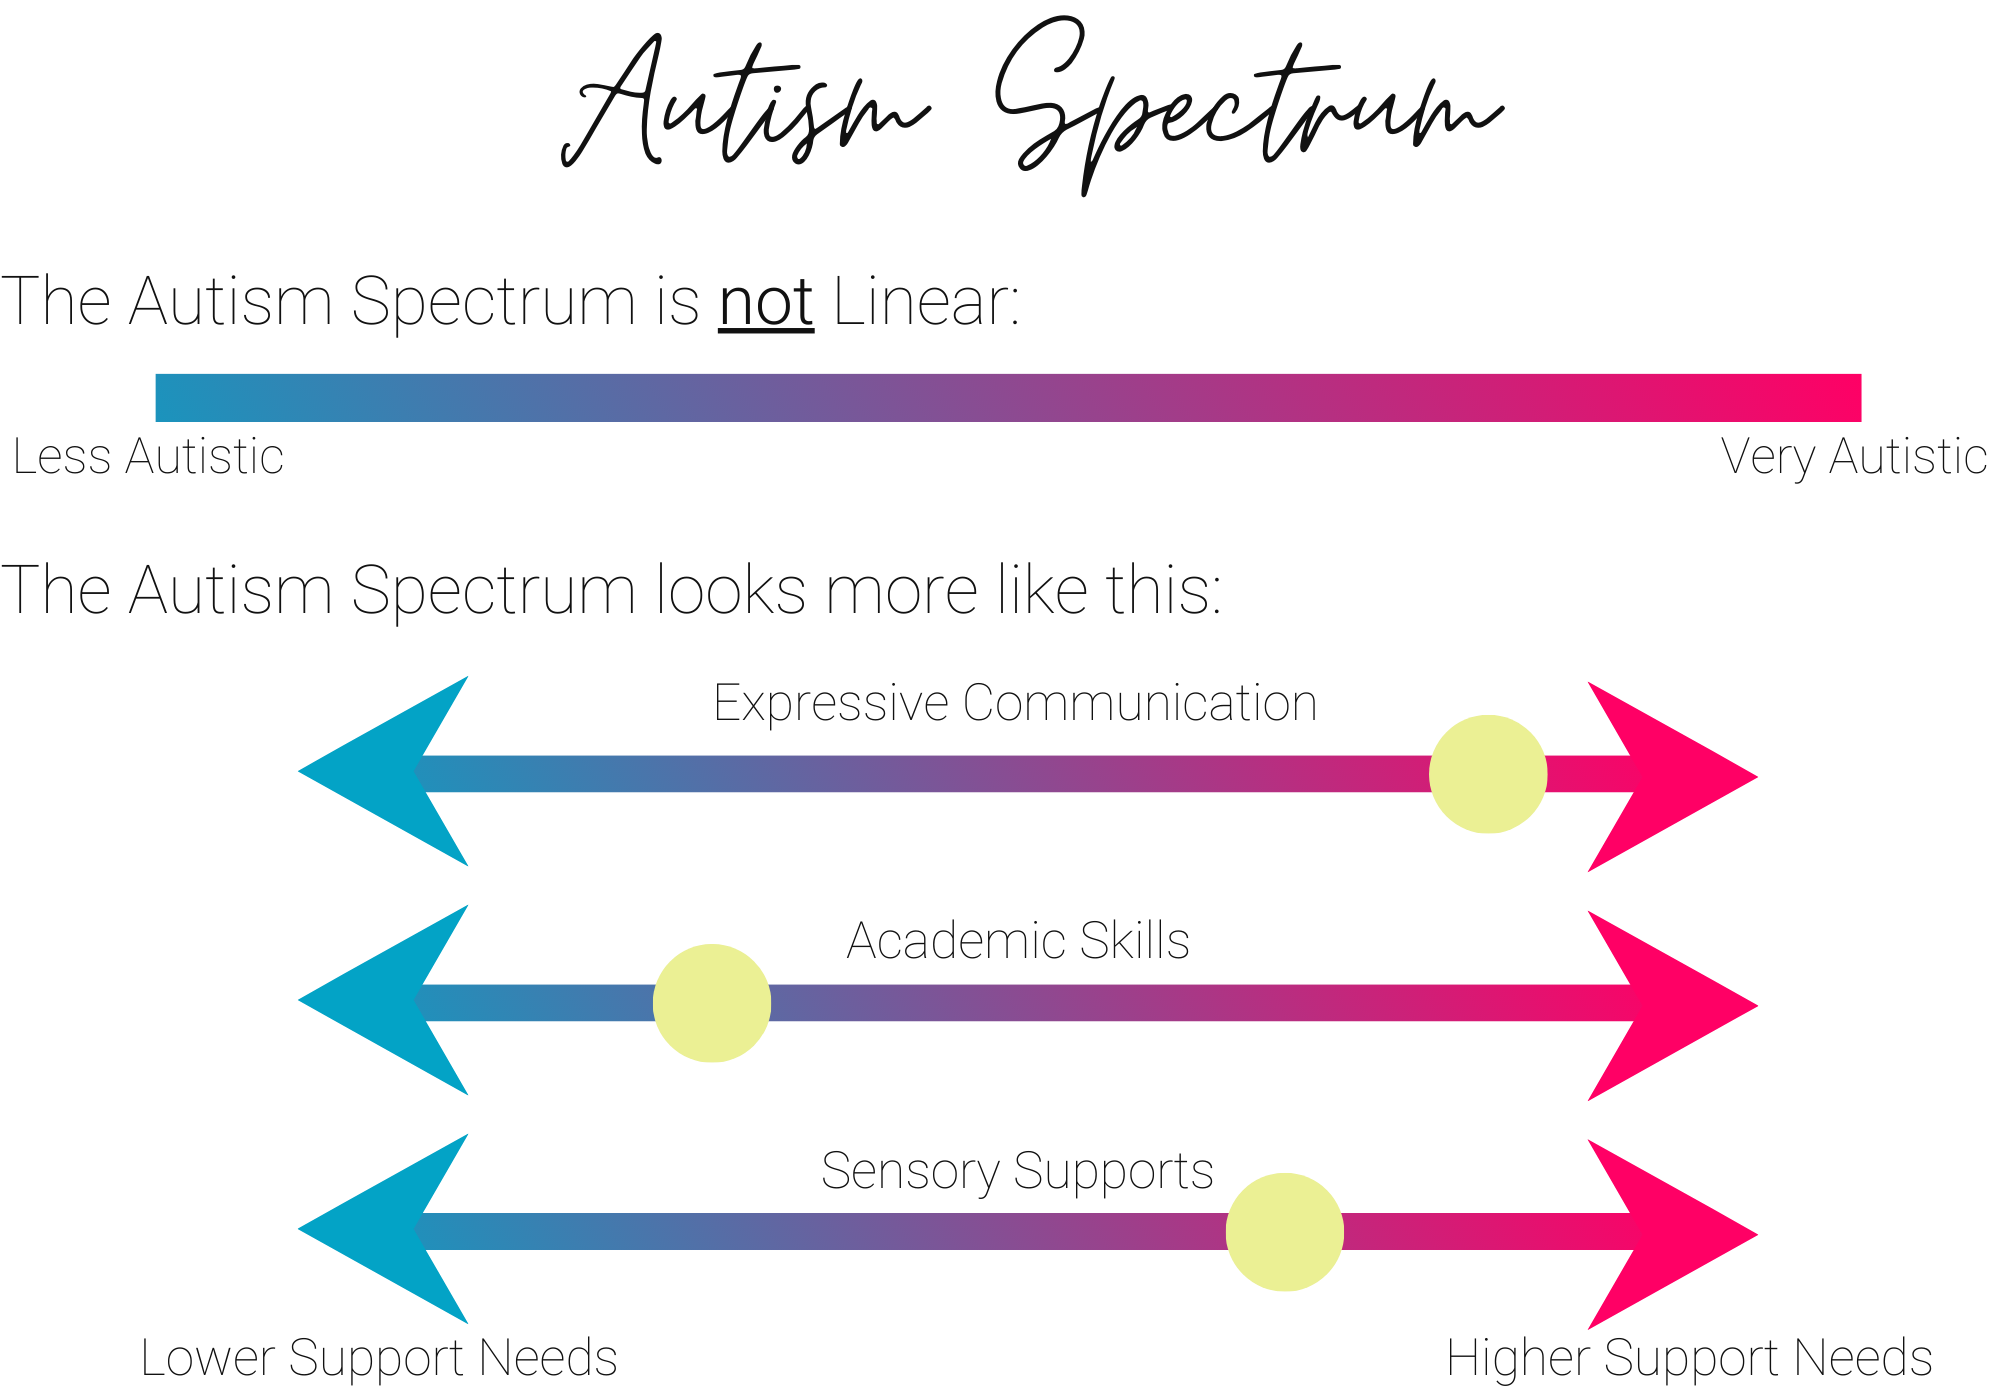 Autism Spectrum is not linear, instead it is more appropriate to describe the supports needed.